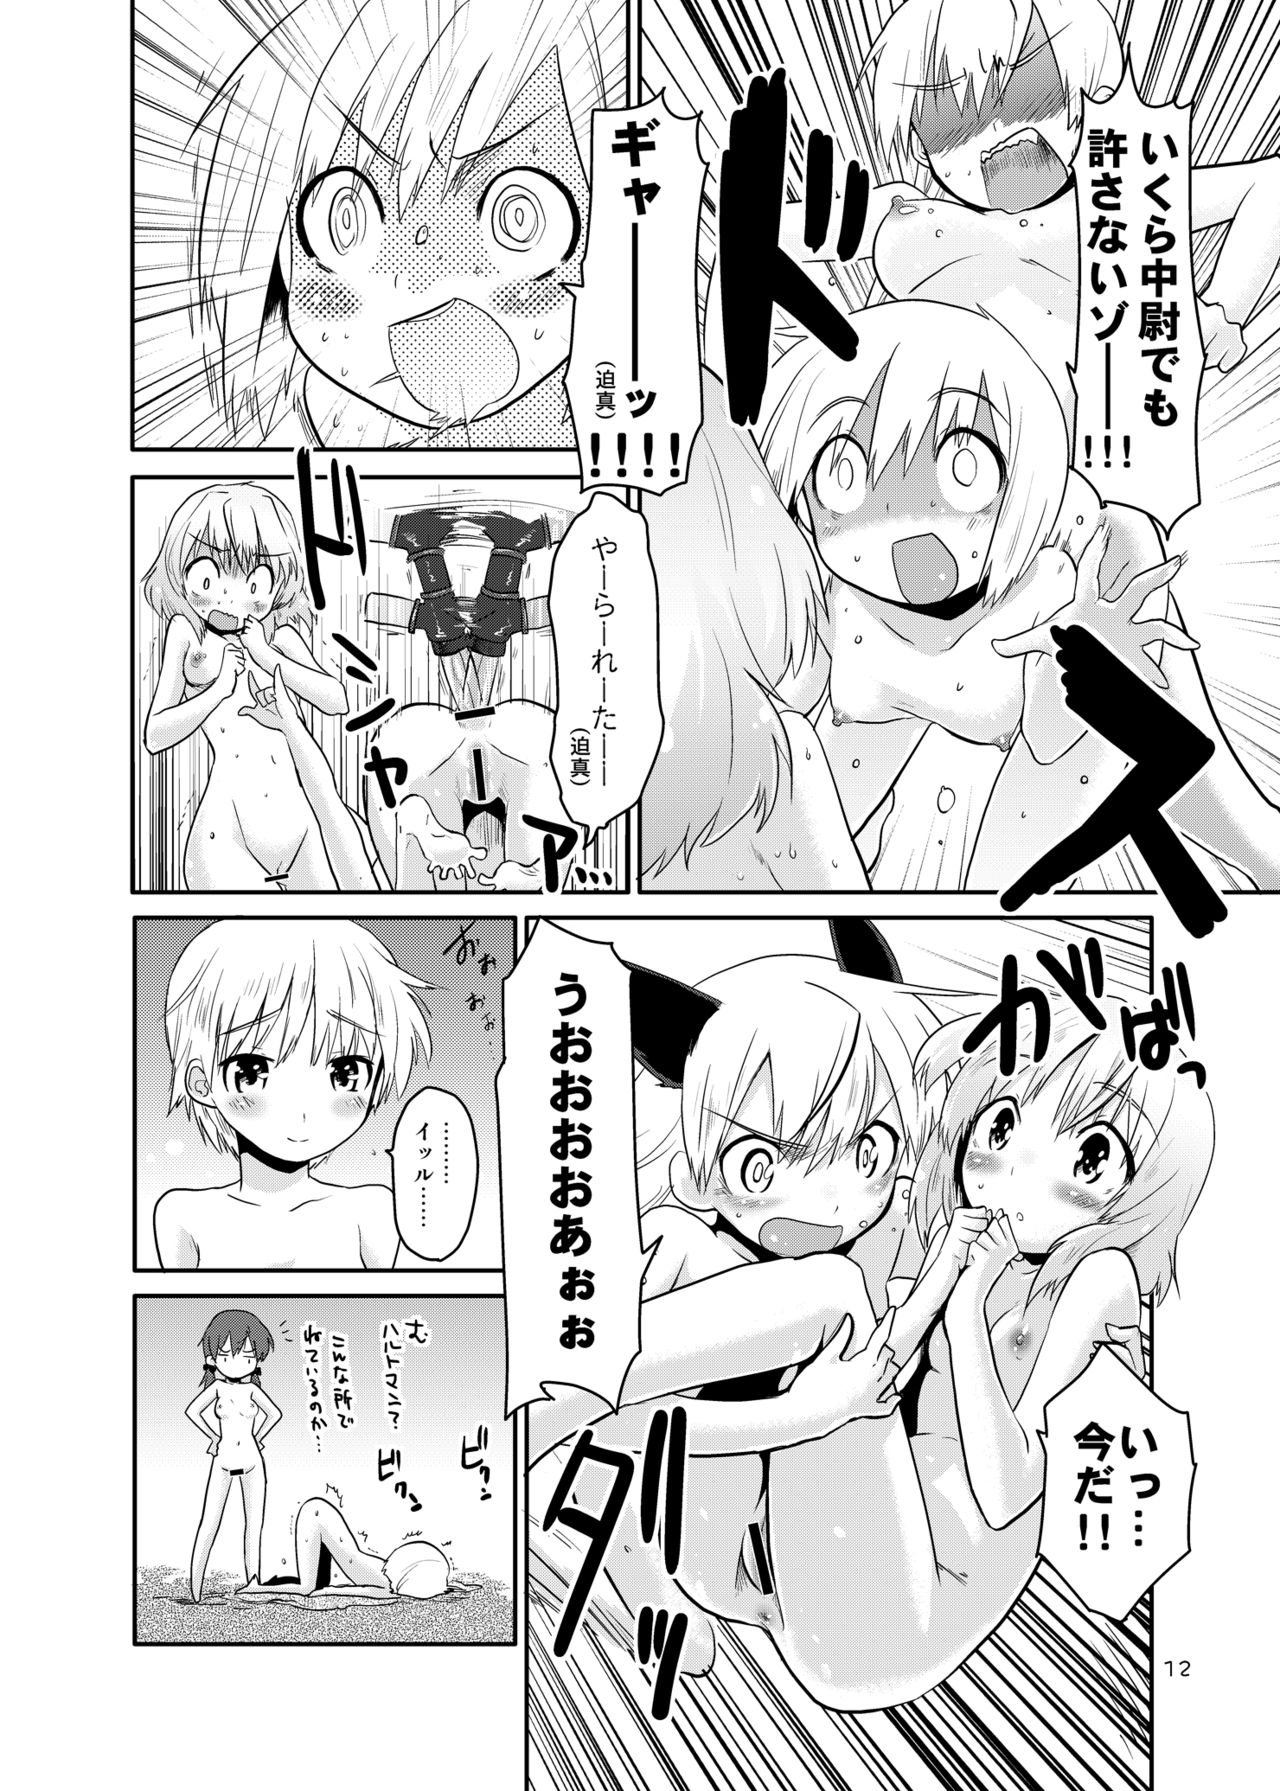 [Peθ (Mozu)] The First Package (Strike Witches) [Digital] page 12 full